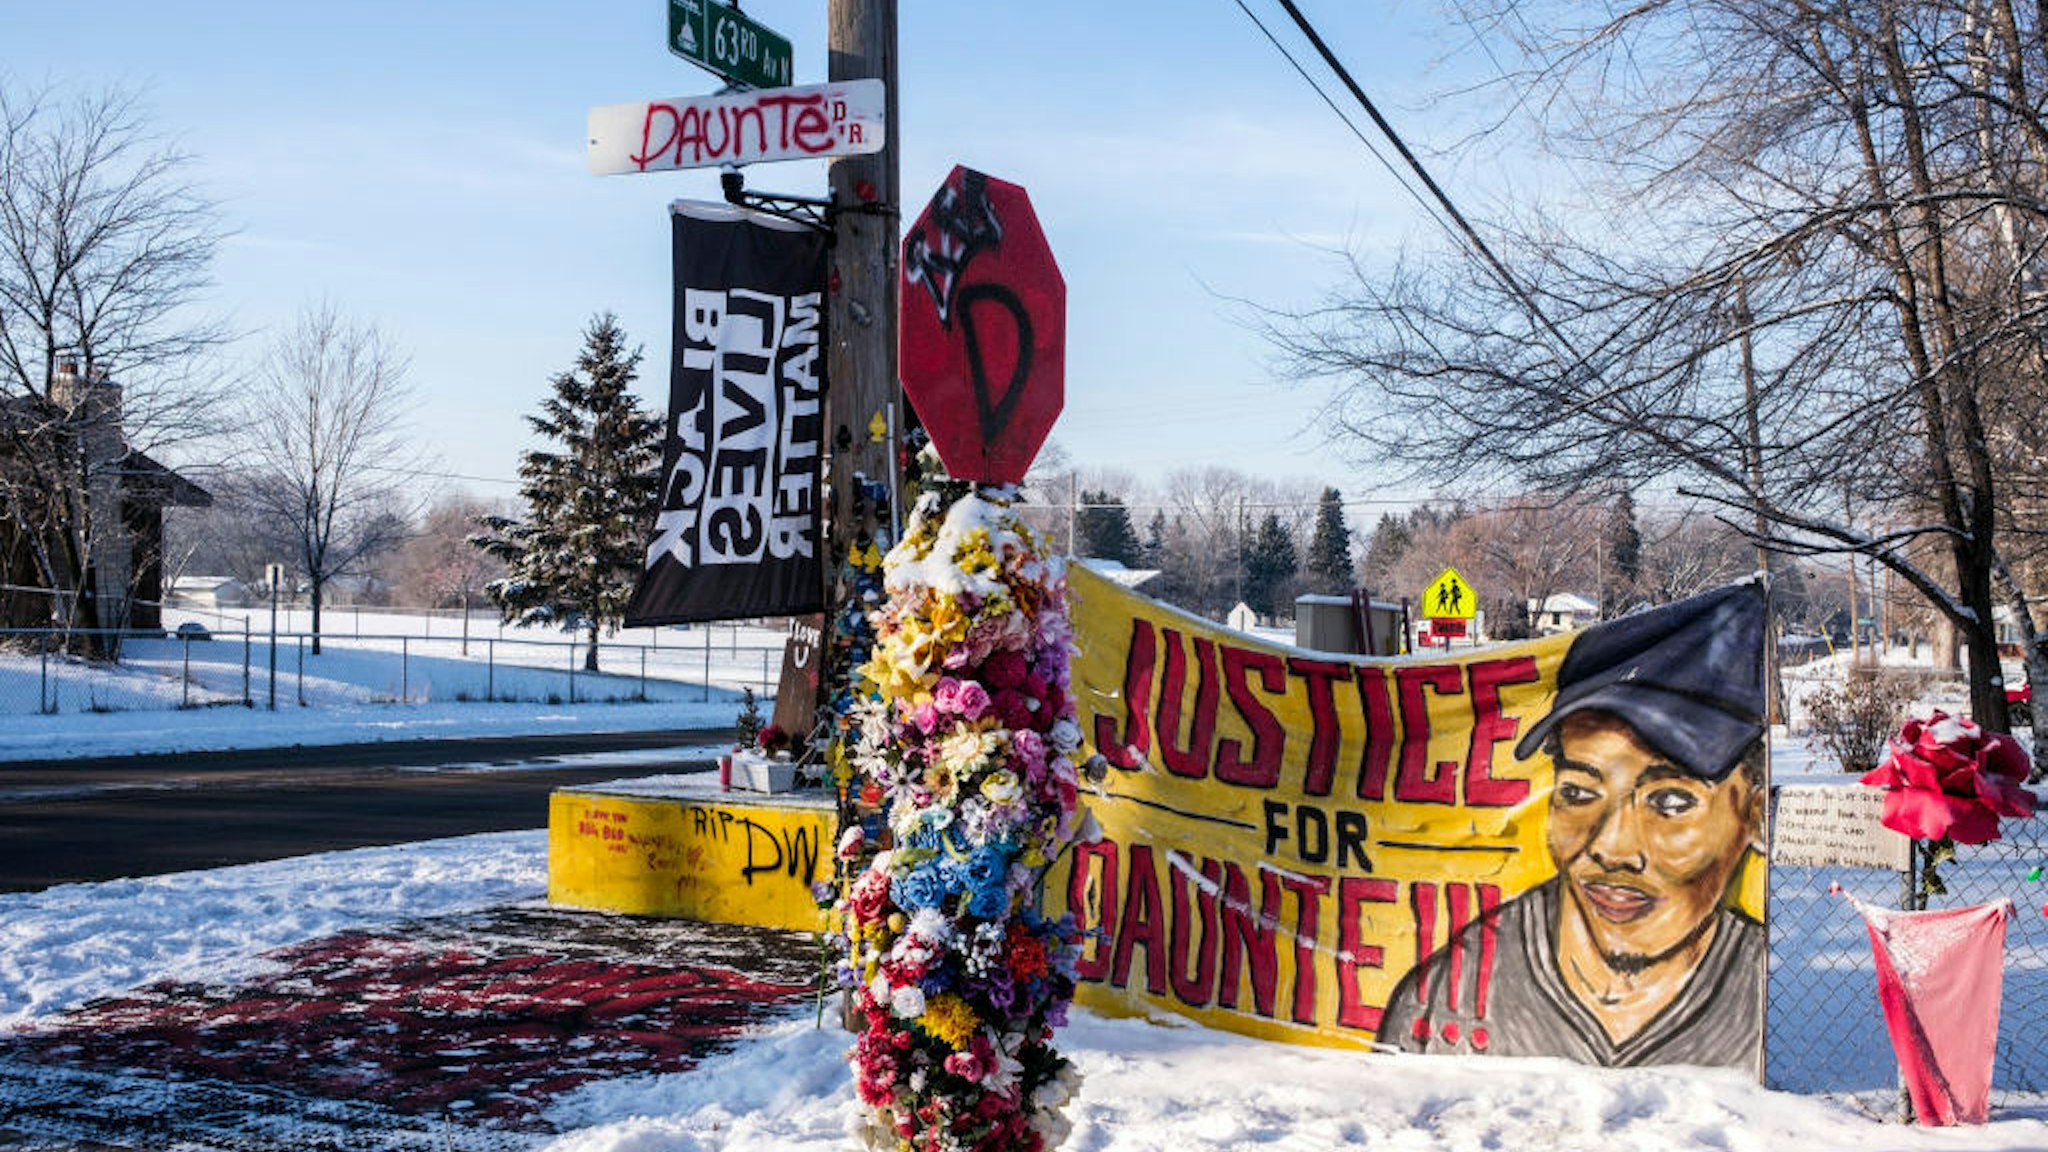 MINNEAPOLIS, MN - DECEMBER 08: A general view of a memorial for Daunte Wright, which stands at the intersection where he was killed, on December 8, 2021 in Minneapolis, Minnesota. Opening statements begin today in the trial of former Brooklyn Center police officer Kim Potter, who is charged with manslaughter in the April 2021 shooting death of Daunte Wright. Potter claims she thought she was using her taser when she shot Wright with her handgun. (Photo by Stephen Maturen/Getty Images)